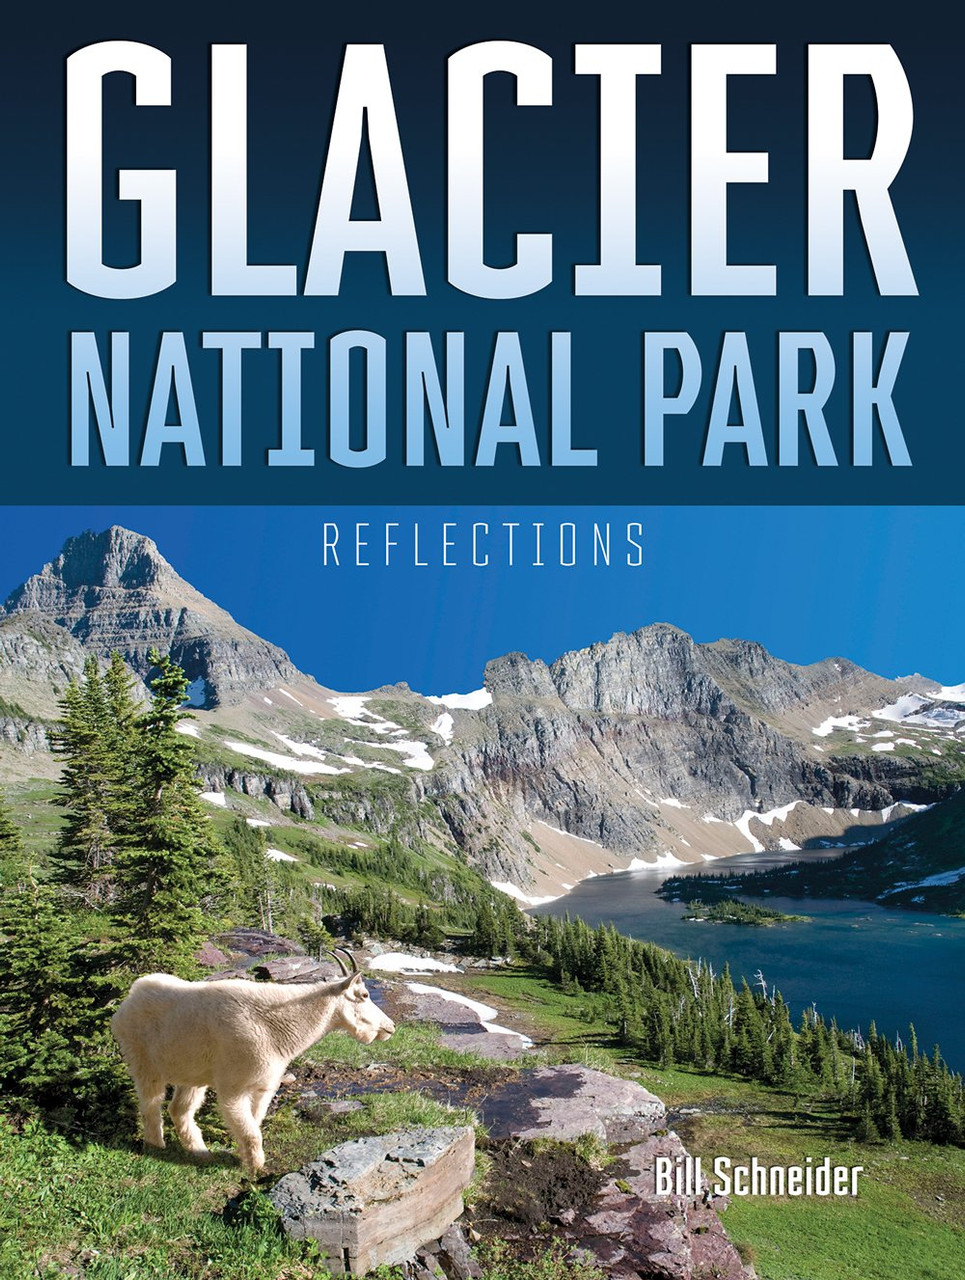 https://cdn11.bigcommerce.com/s-ig5sr43nuo/images/stencil/1280x1280/products/1369/3813/Glacier-National-Park-Reflections__S_1__85867.1570066910.jpg?c=2